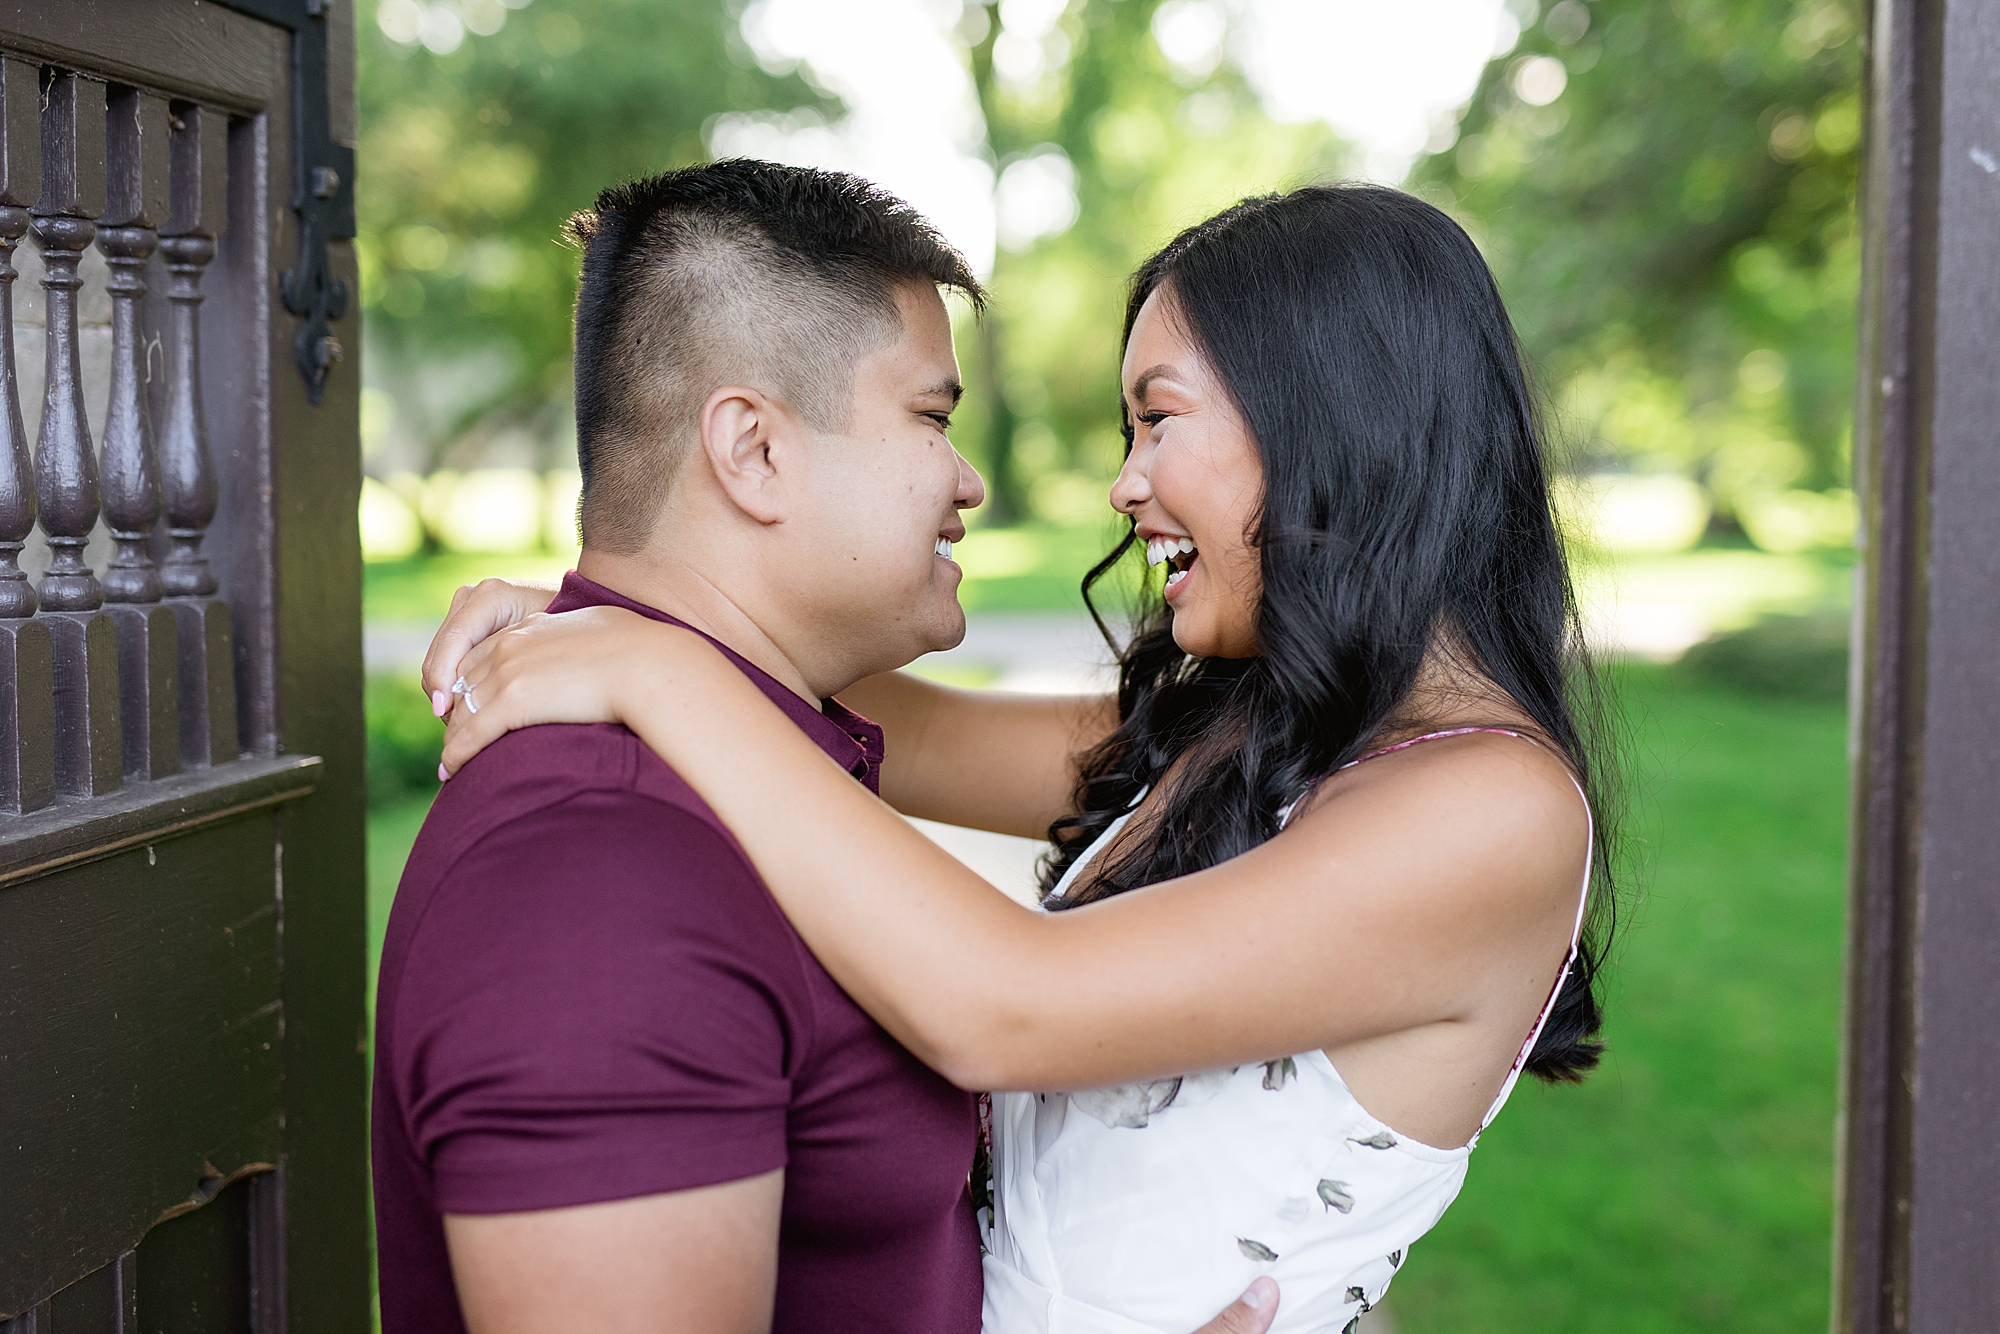 An elegant Detroit, Michigan Summer Edsel and Eleanor Ford House engagement photo session by Breanne Rochelle Photography.